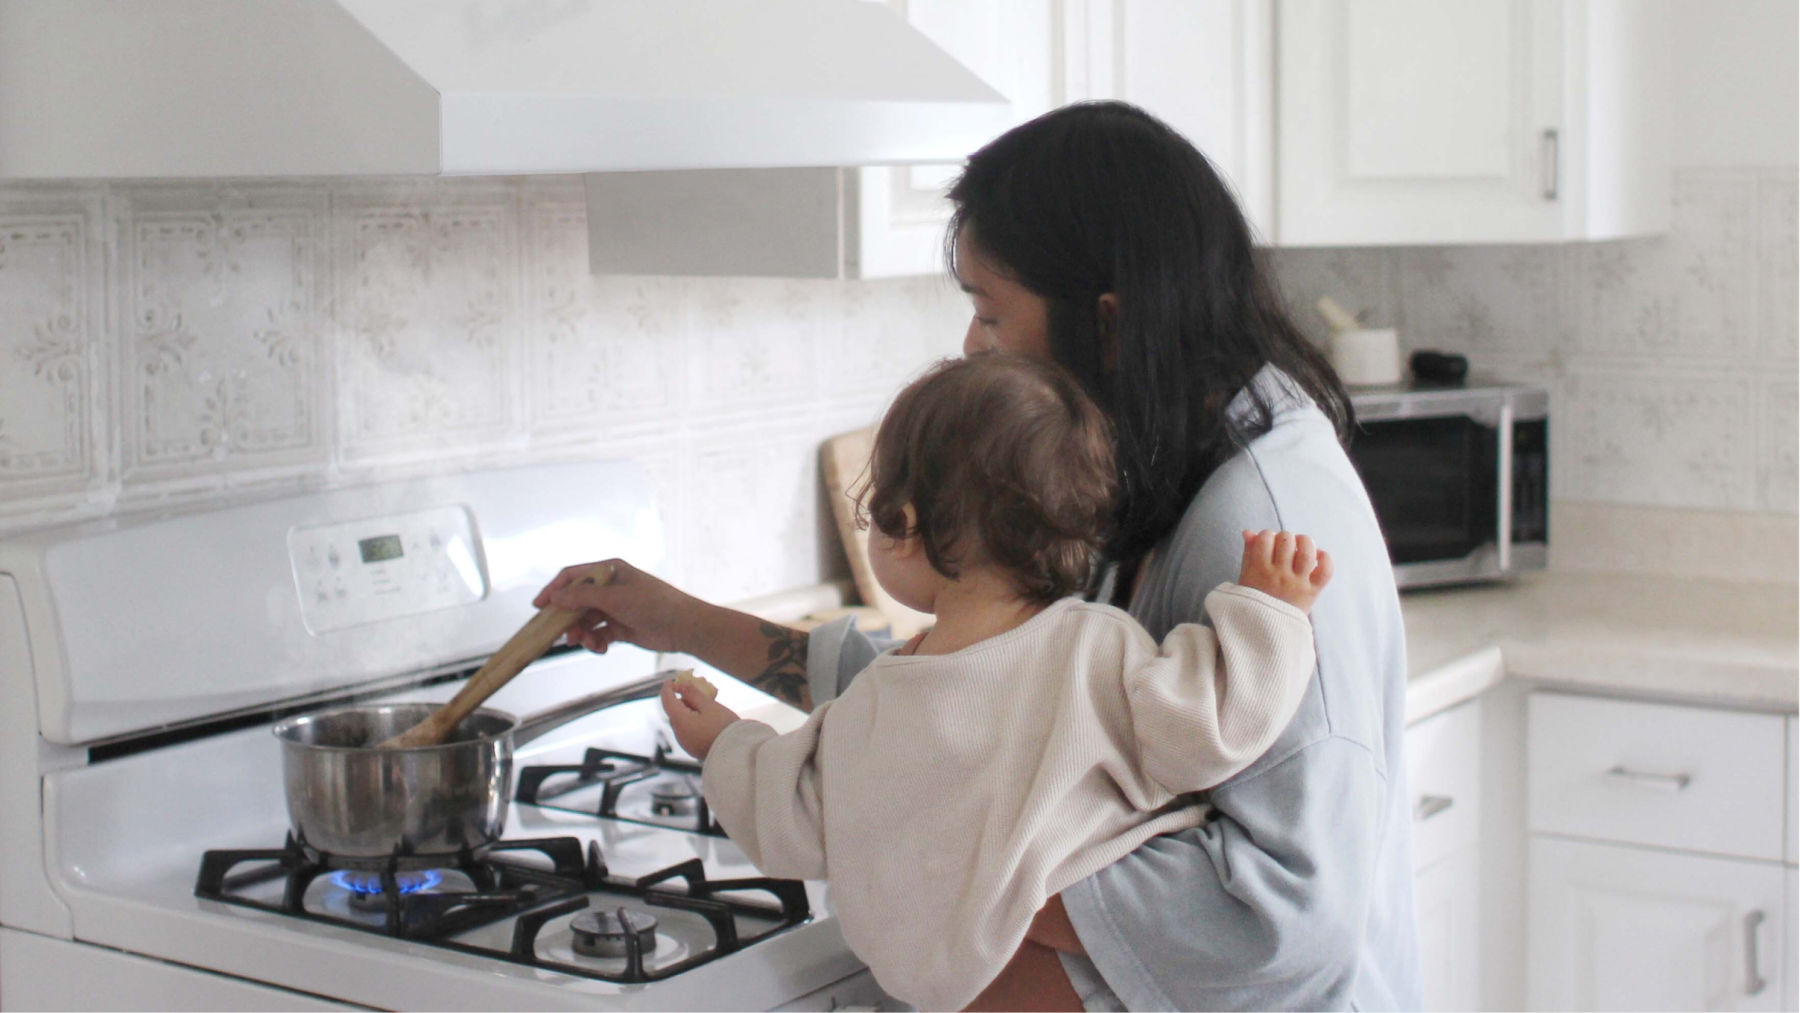 Woman carrying her child and cooking over a gas stove.